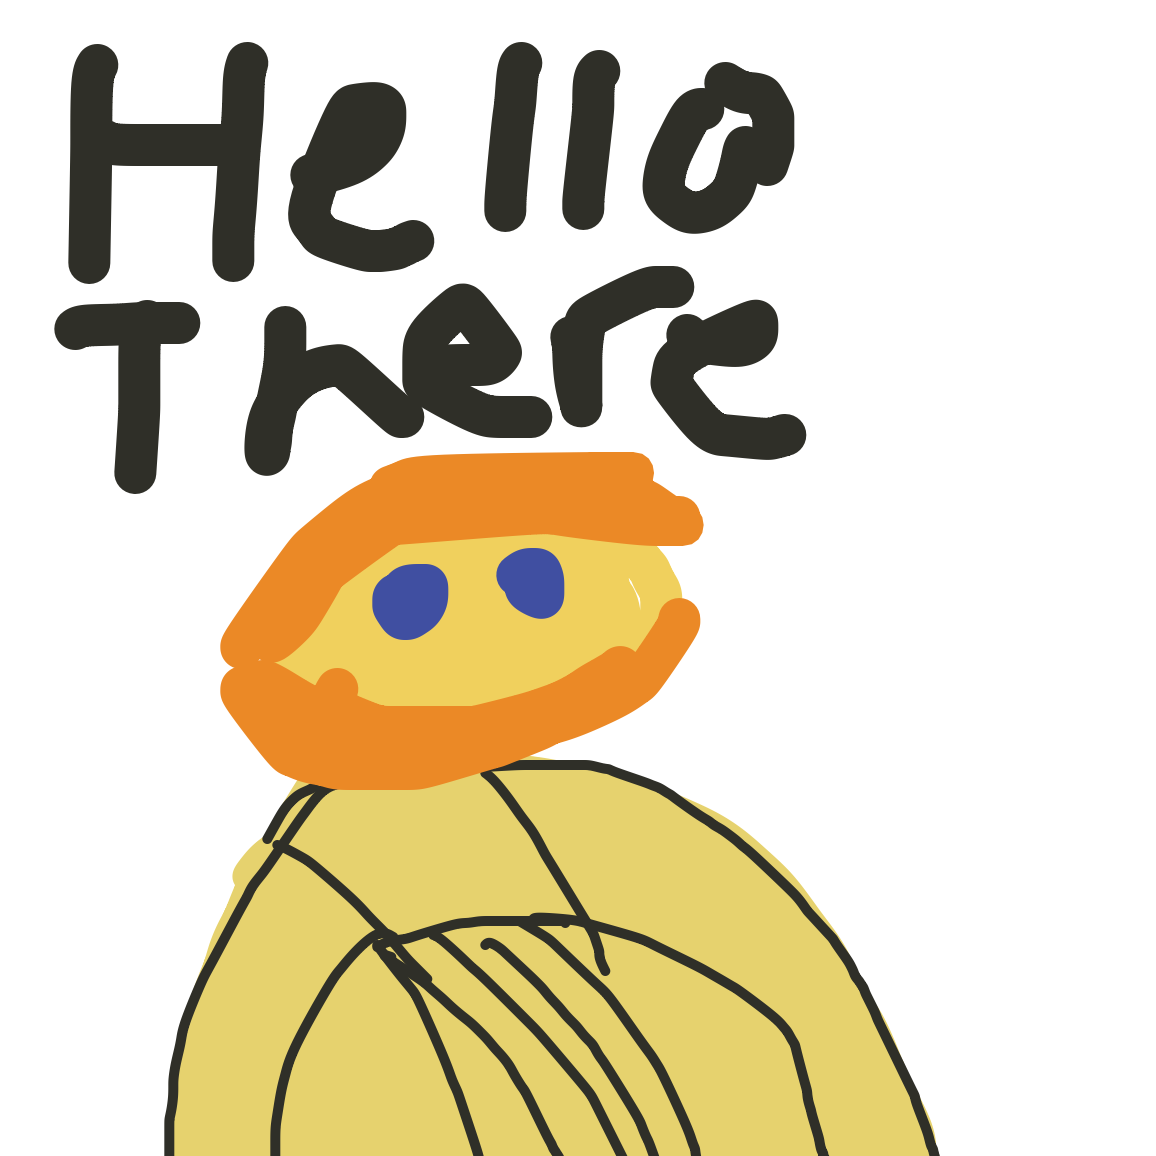 Hello there 
General kenobi - Online Drawing Game Comic Strip Panel by Nonexistent 